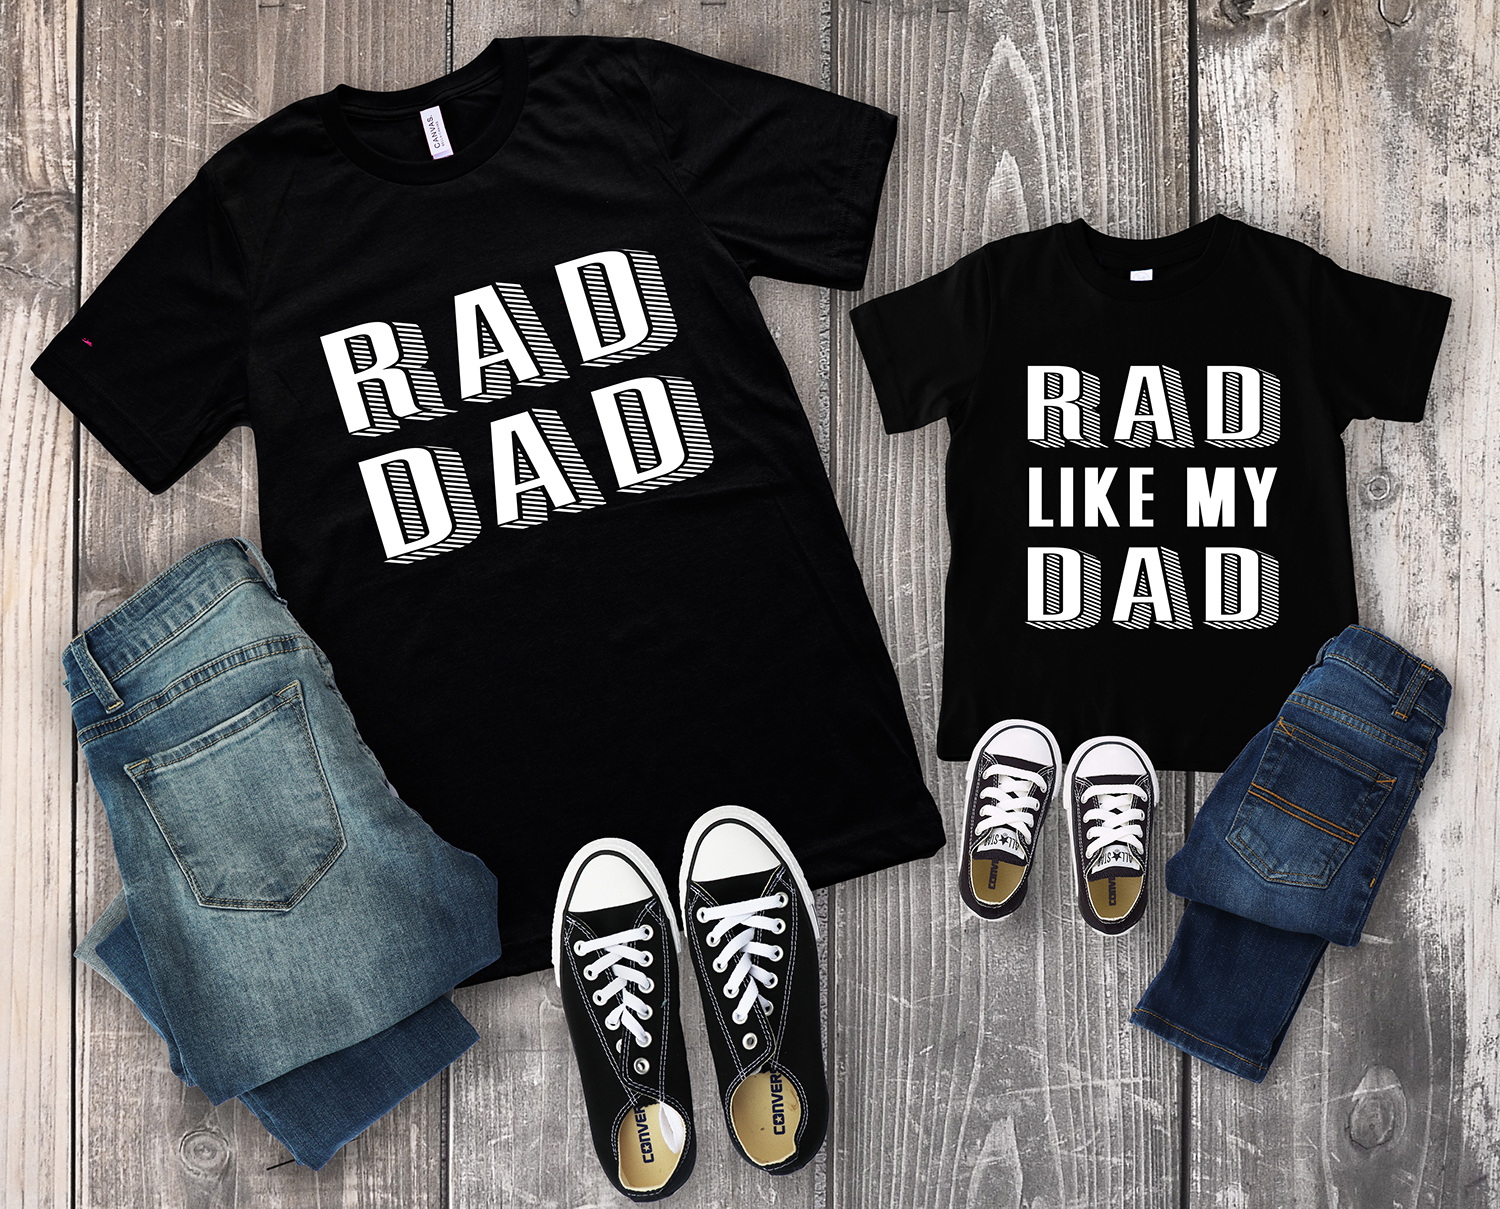 Download Rad Dad Father's Day Shirts + SVG Files - Happiness is ...